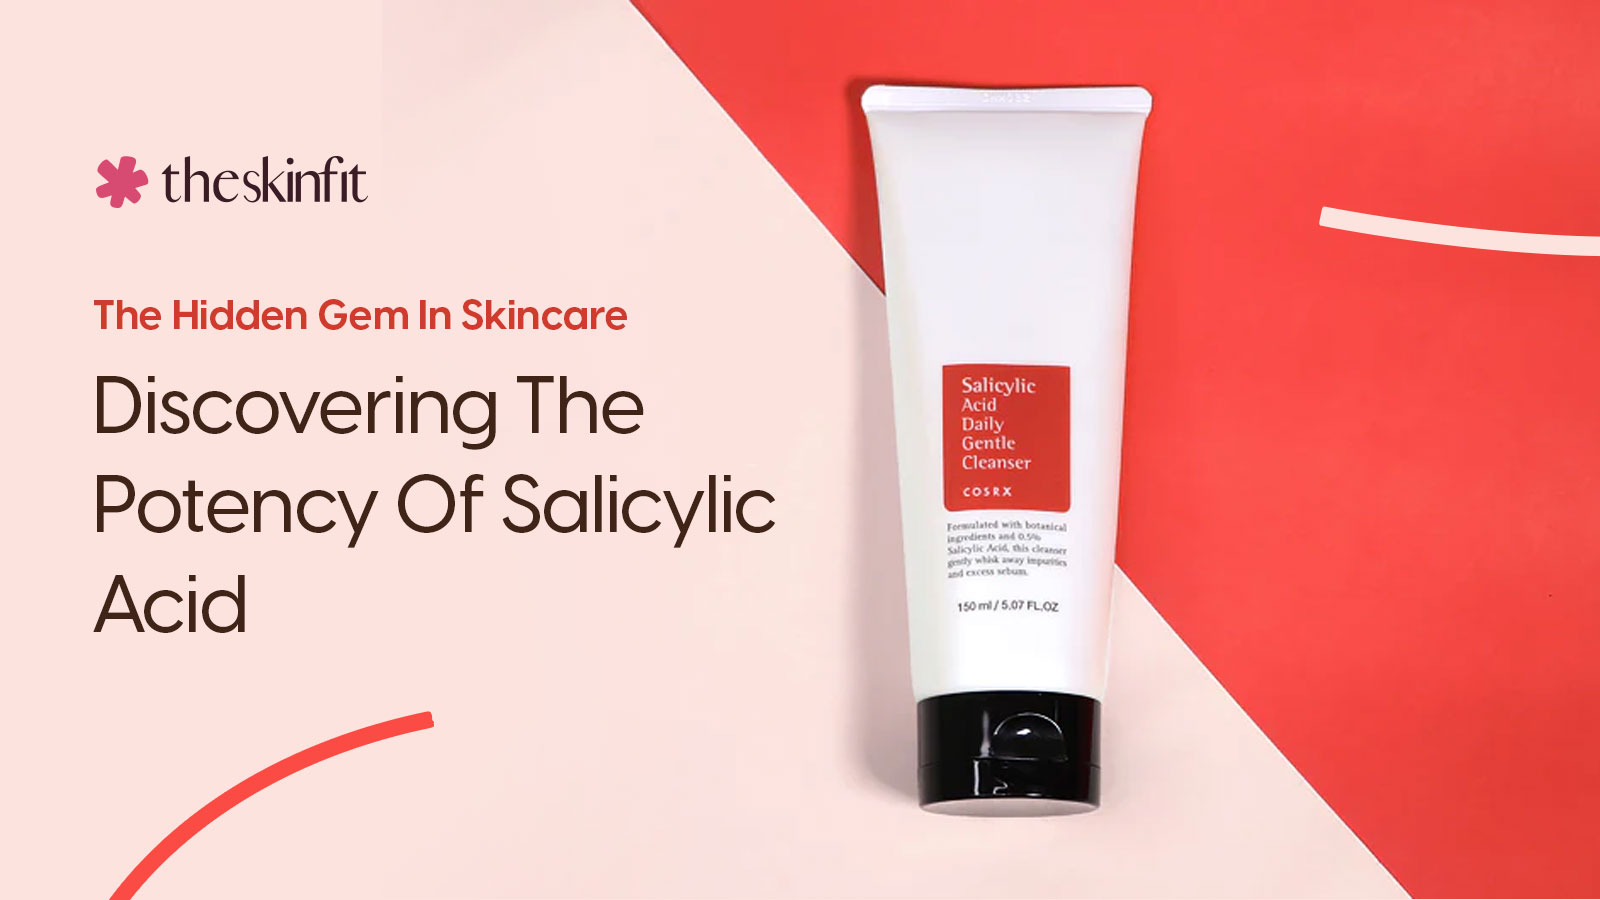 The Hidden Gem In Skincare: Discovering The Potency Of Salicylic Acid